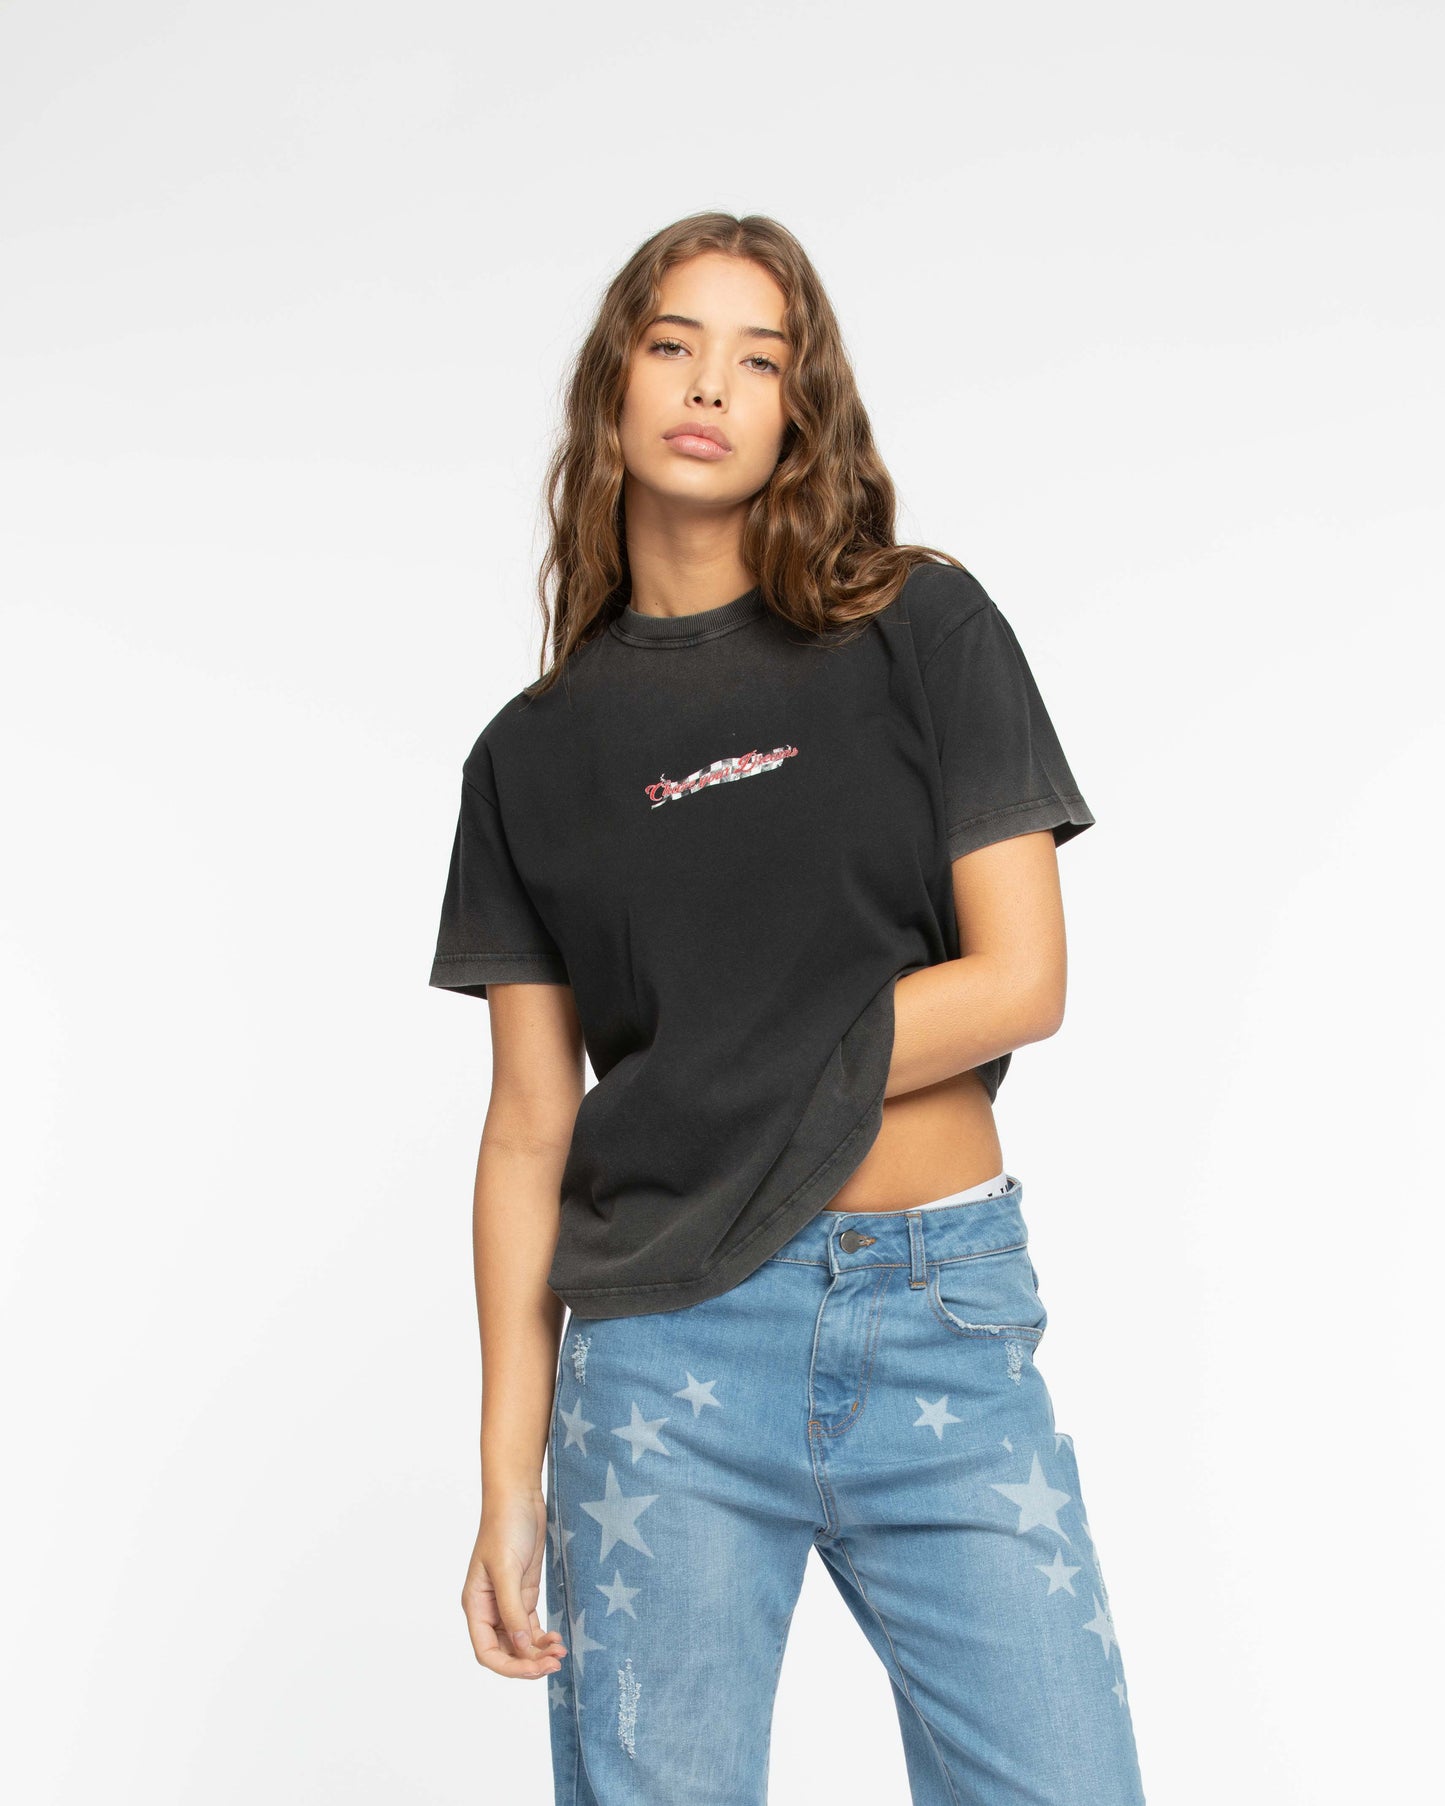 Chase Your Dreams T-Shirt Black